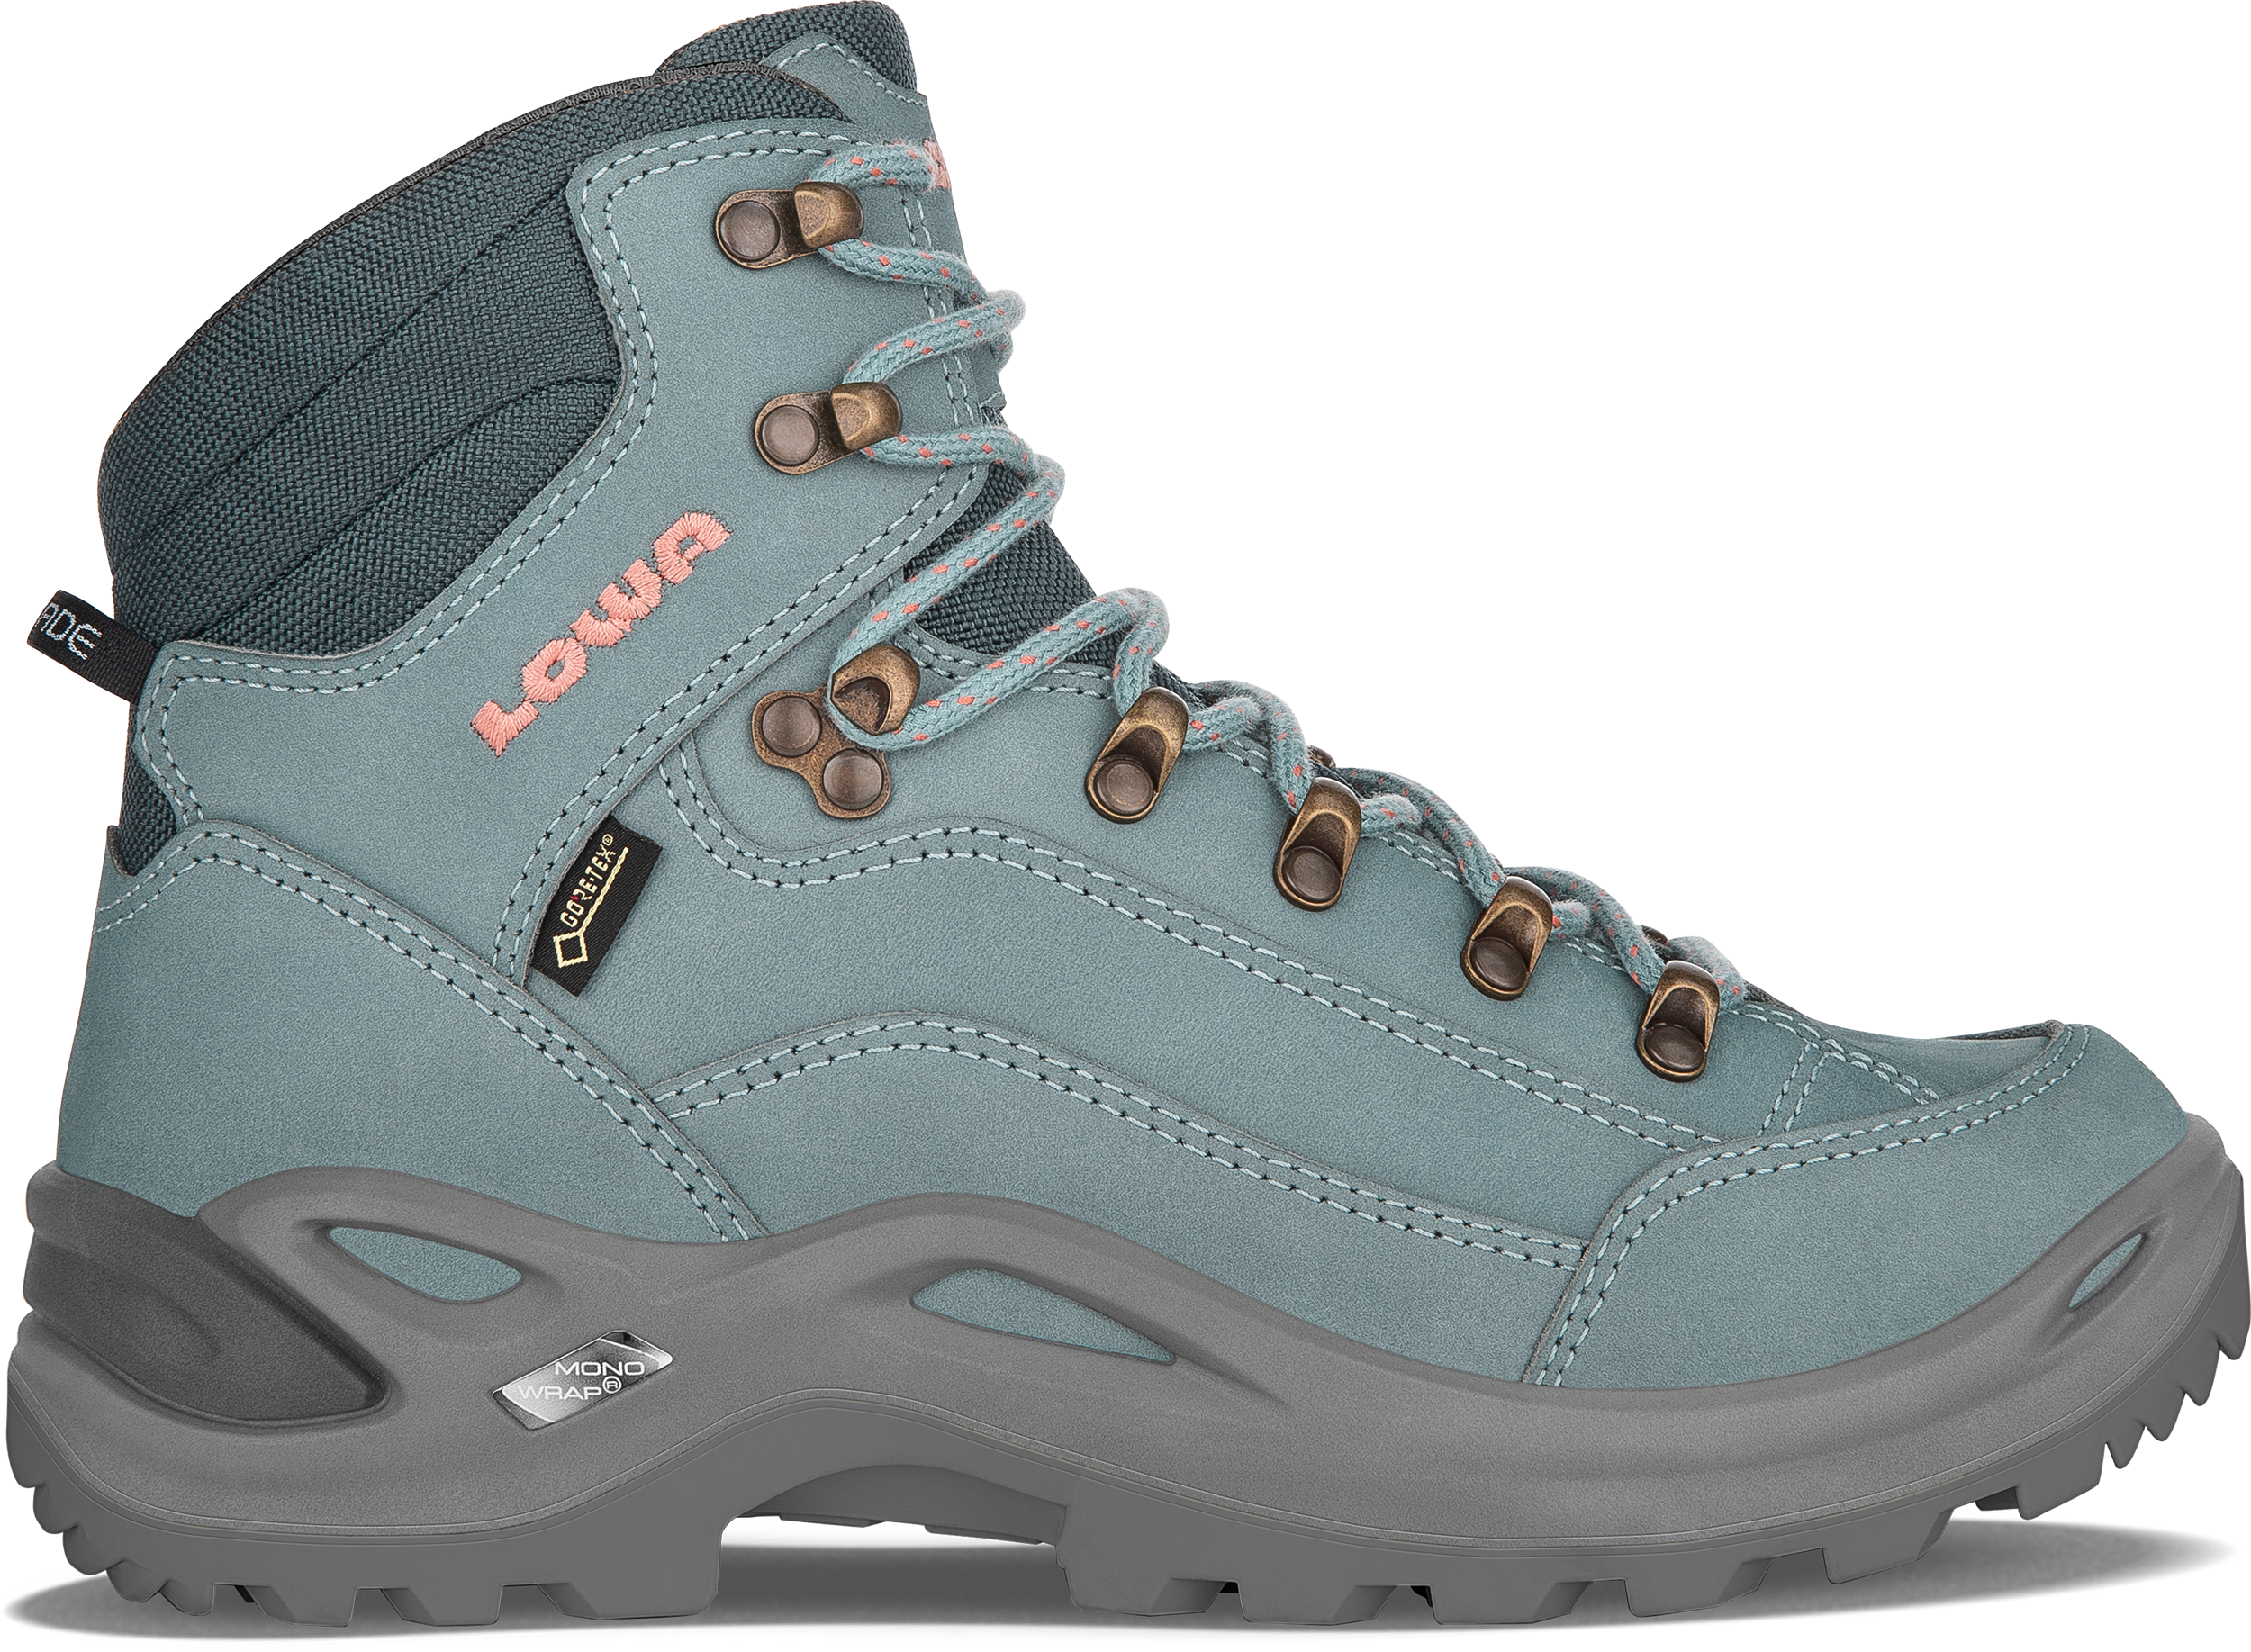 RENEGADE GTX MID ALL TERRAIN CLASSIC shoes for women LOWA INT